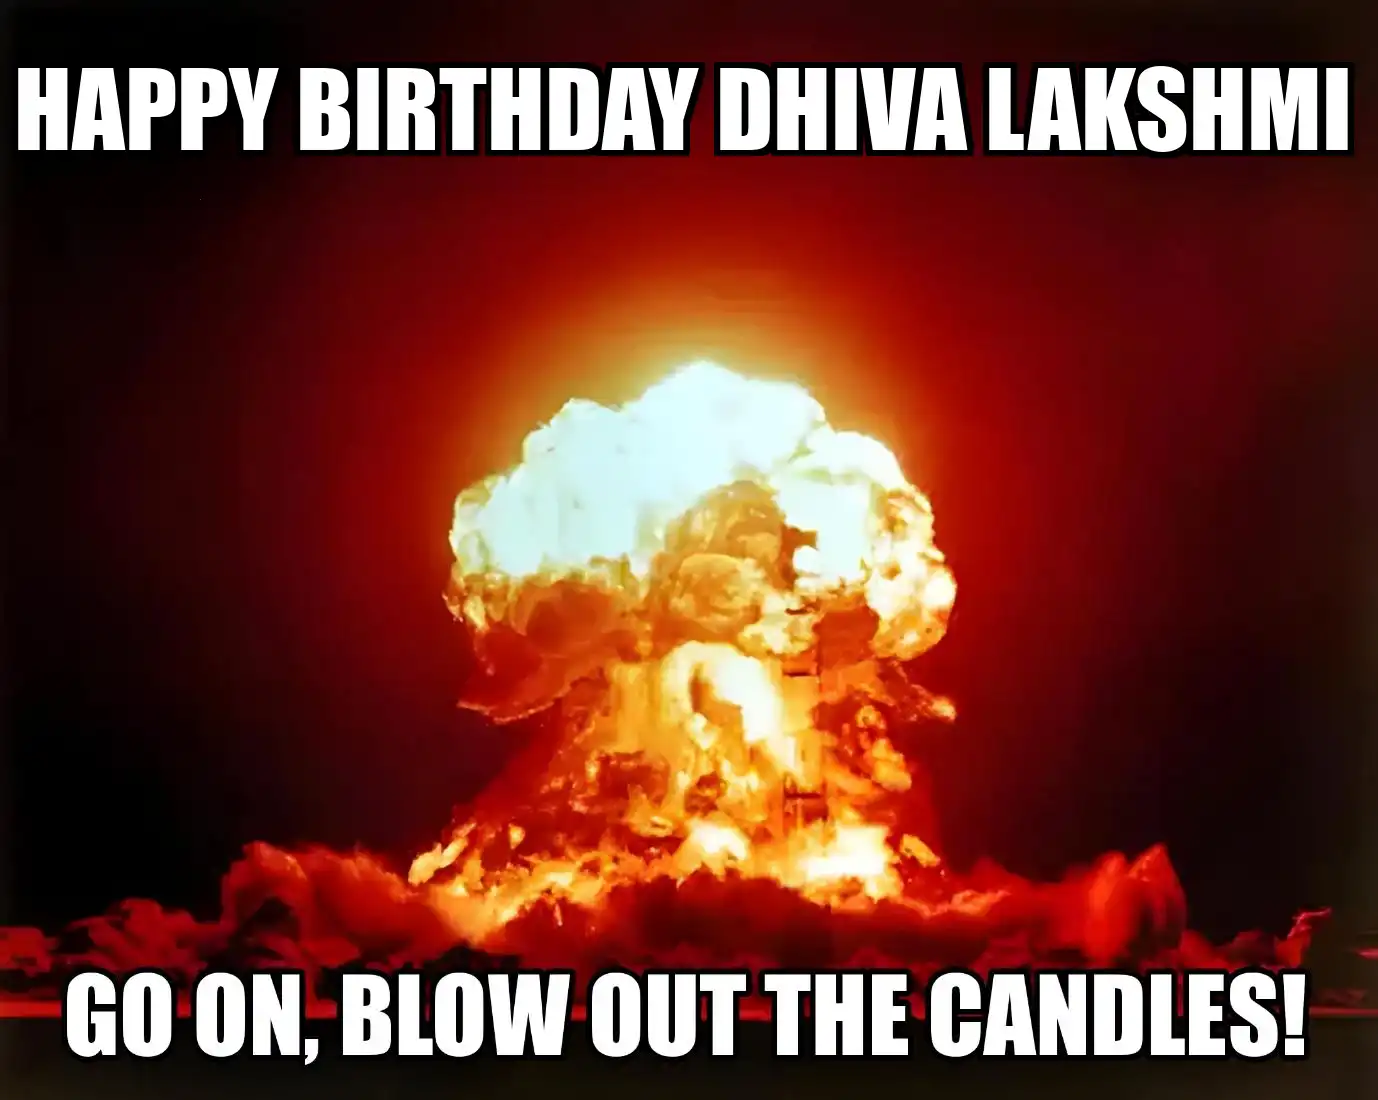 Happy Birthday Dhiva lakshmi Go On Blow Out The Candles Meme